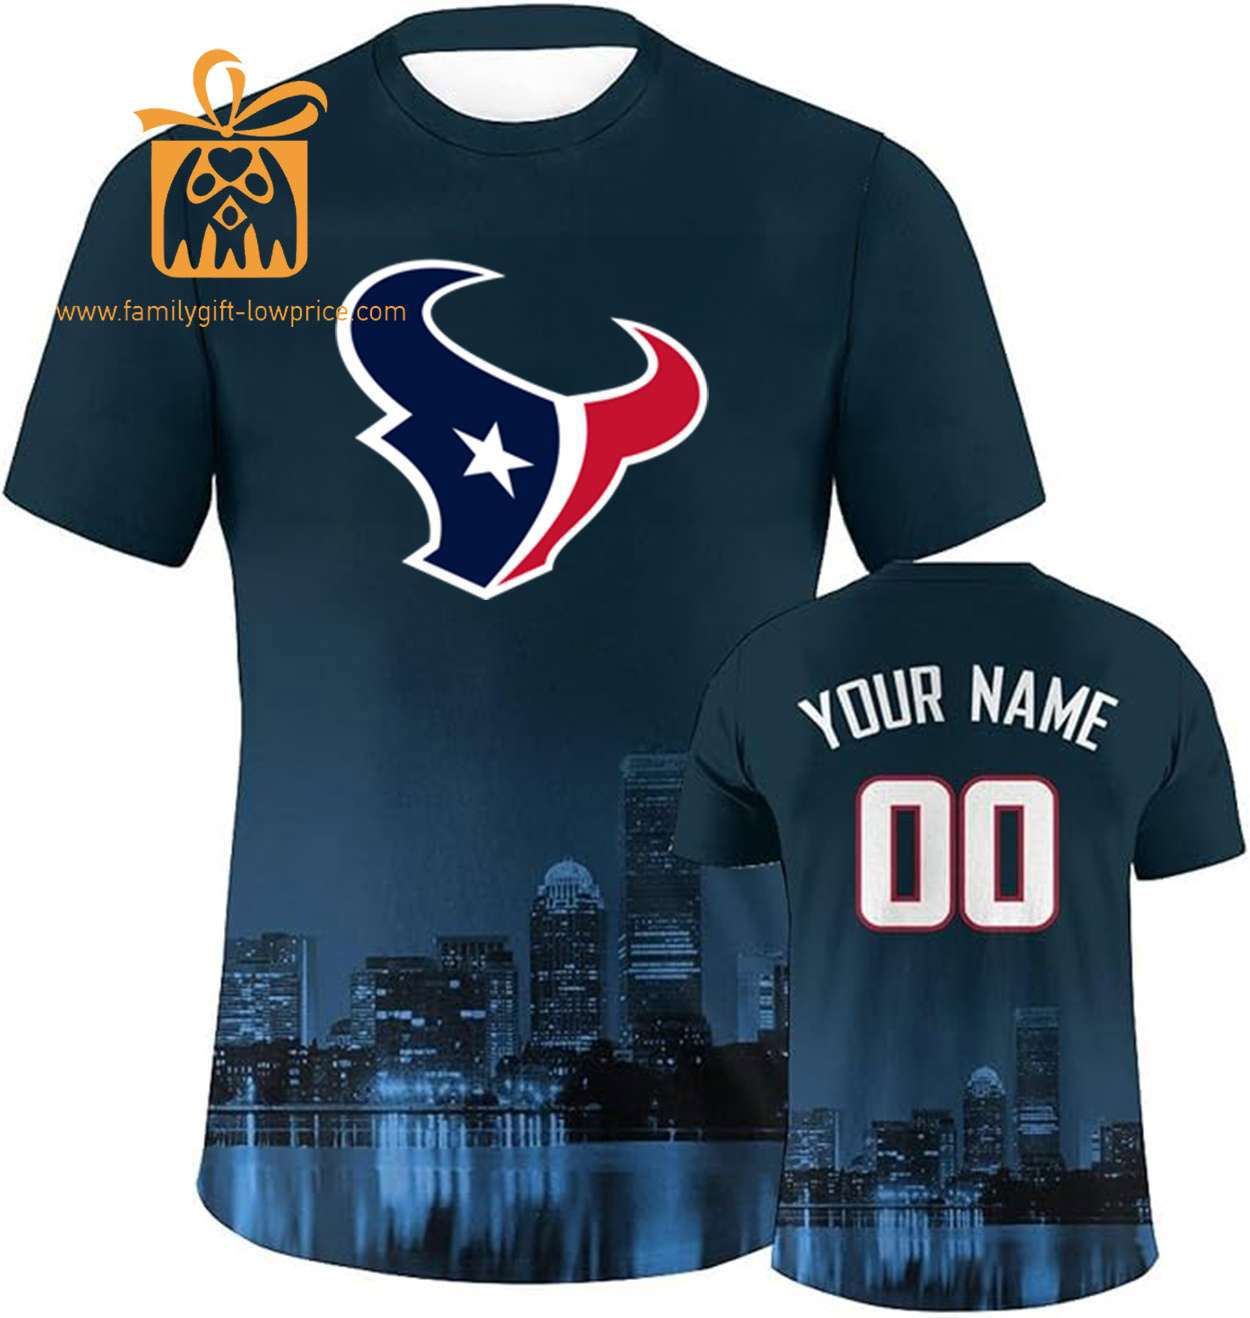 Houston Texans Custom Football Shirts - Personalized Name & Number, Ideal for Fans